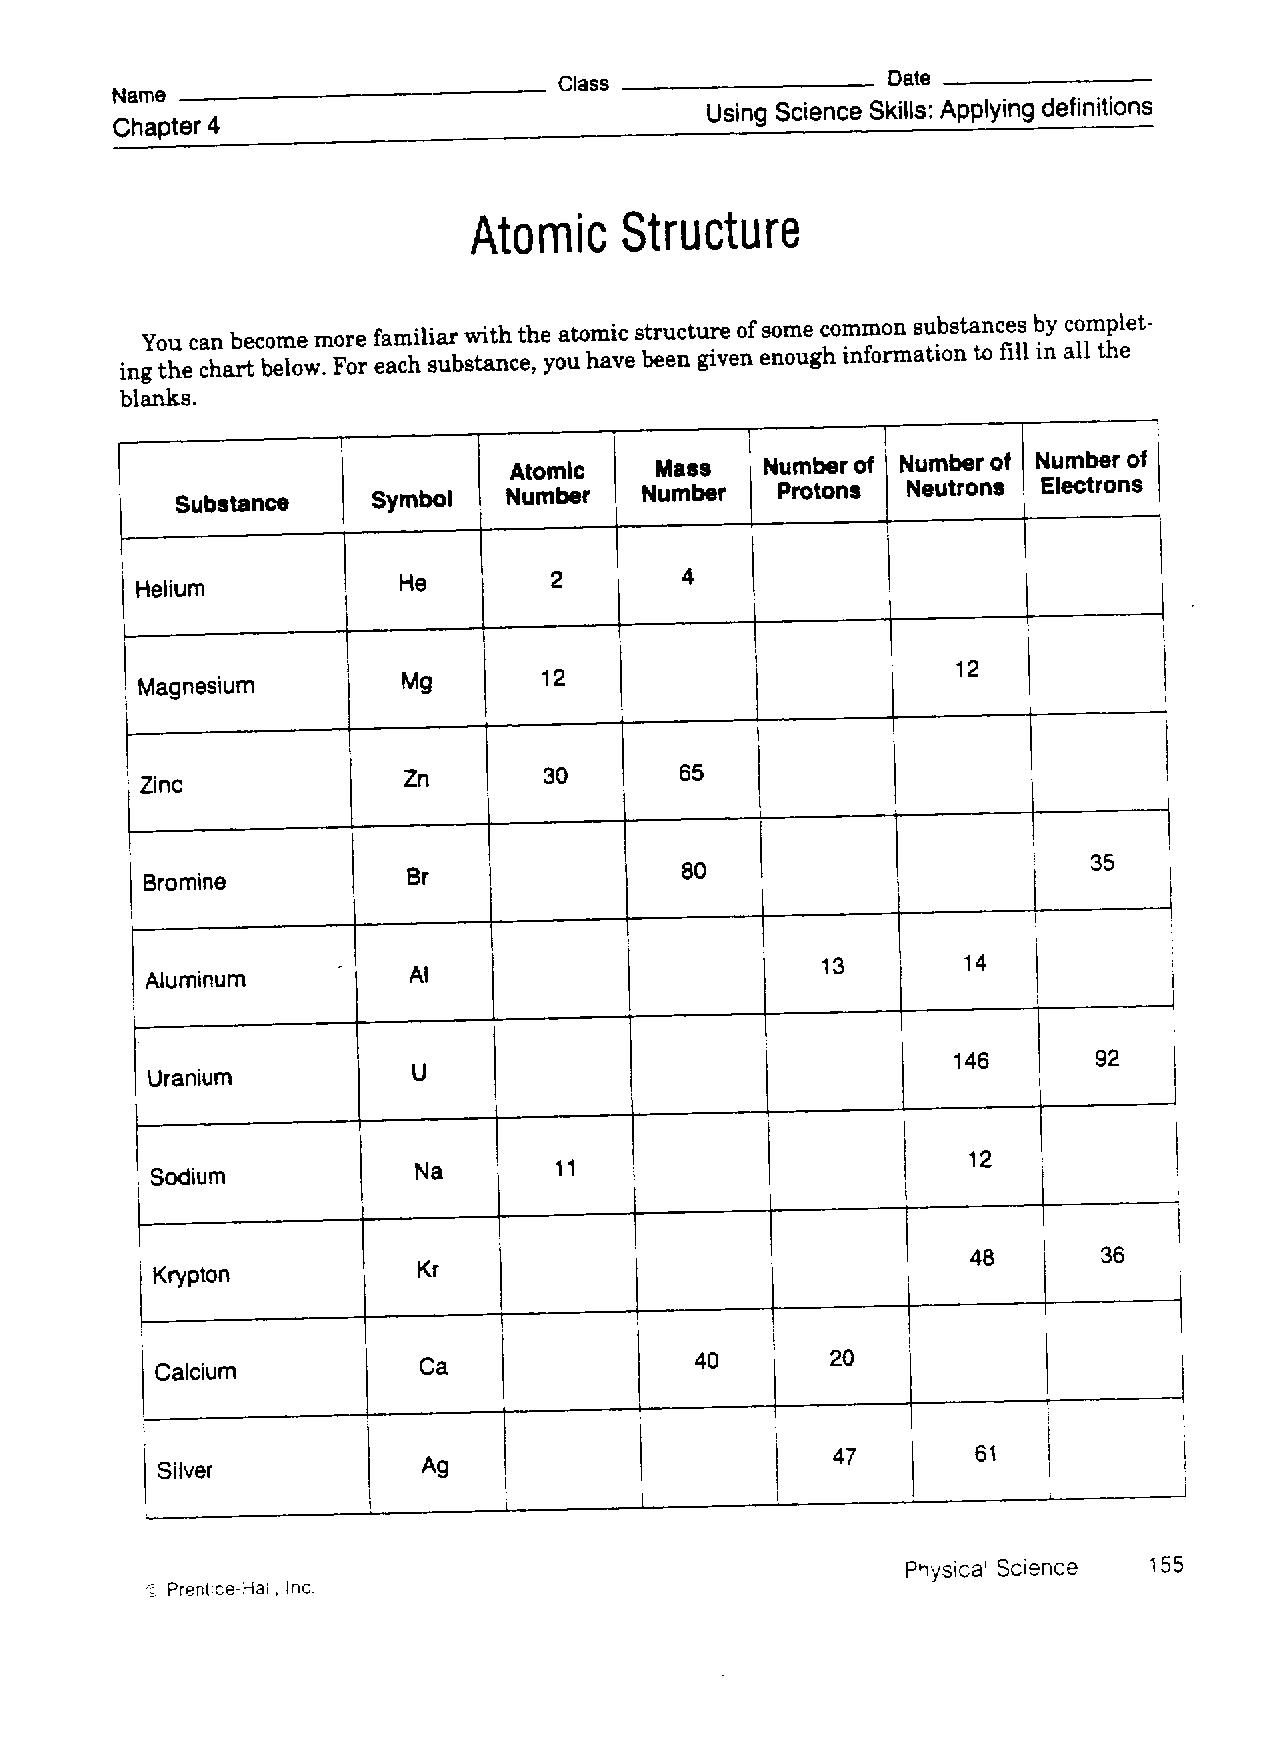 Chemistry Atomic Structure Worksheet Answers Image